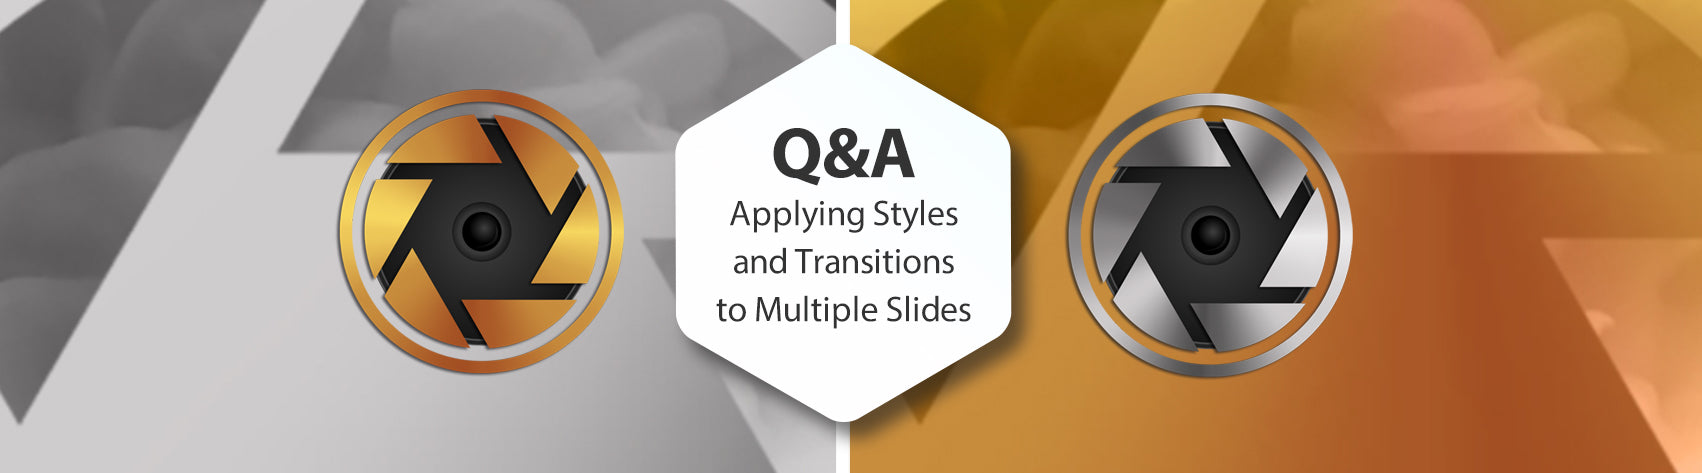 Q&A - Applying Styles and Transitions to Multiple Slides